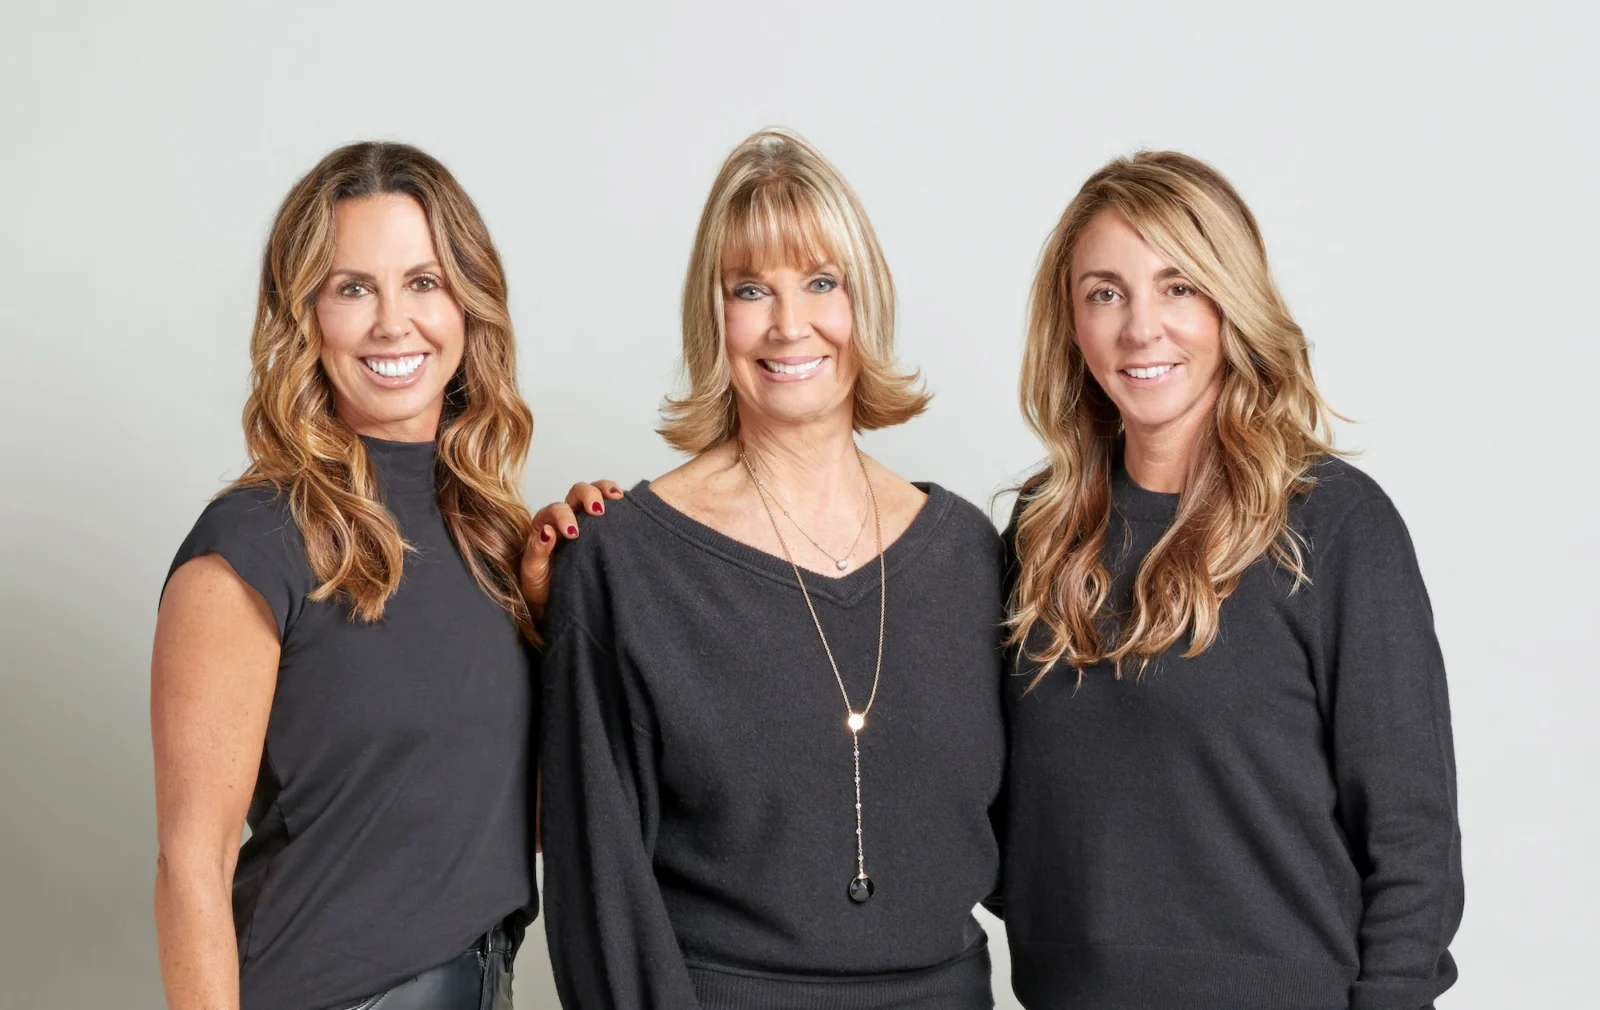 Jazzercise Taps Longtime Fitness Exec as New President - Athletech News